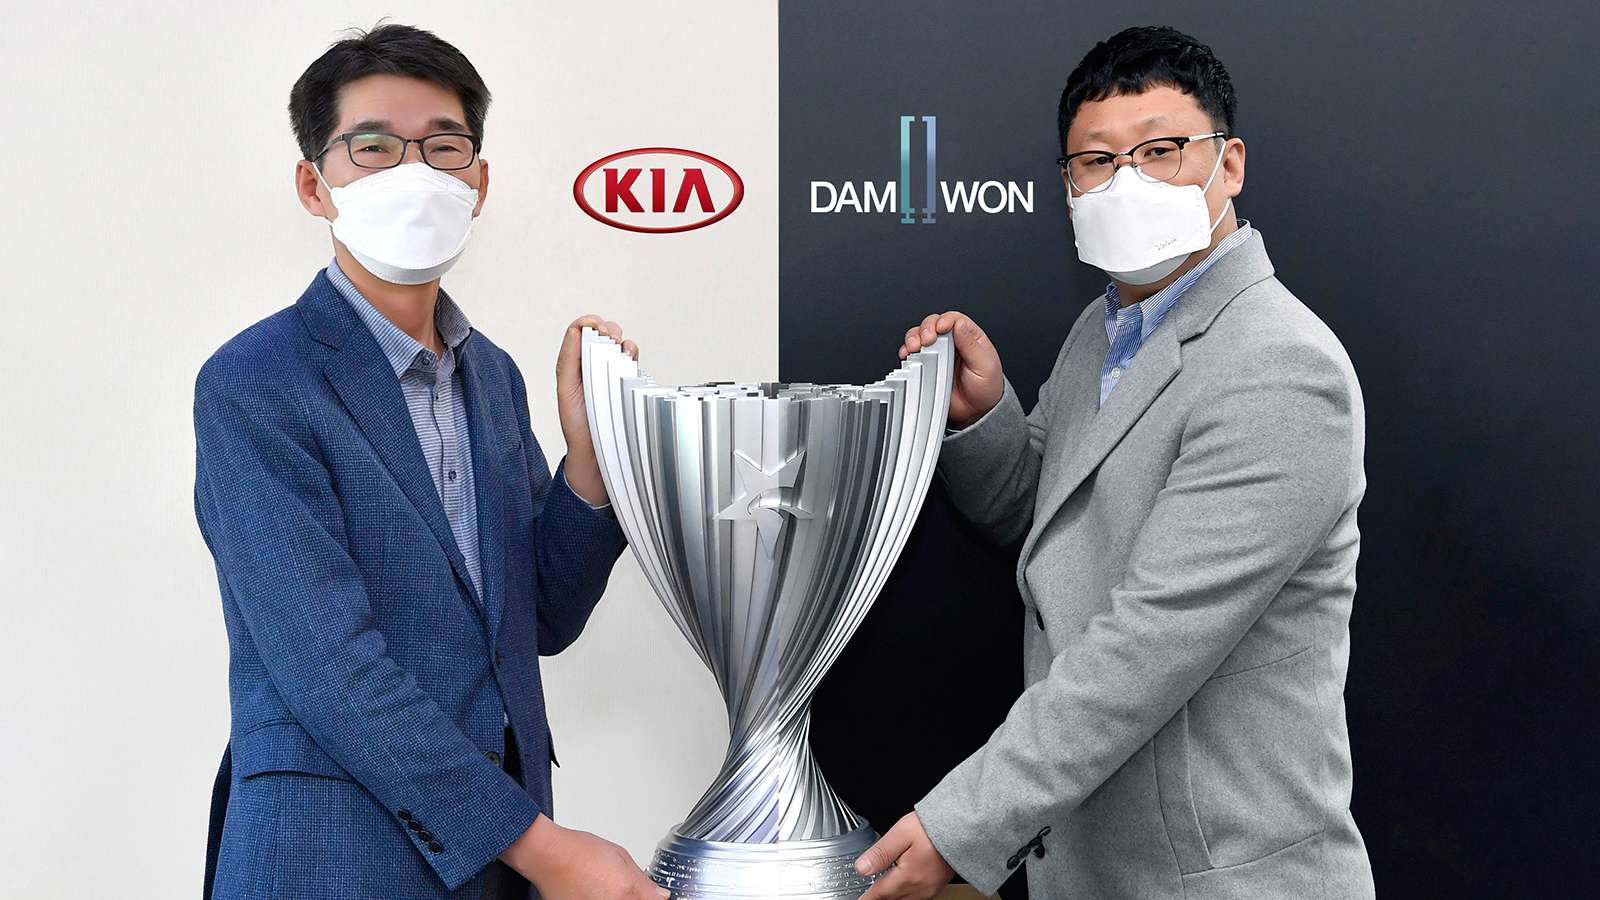 League of Legends champs Damwon Gaming has partnered with KIA Motors.